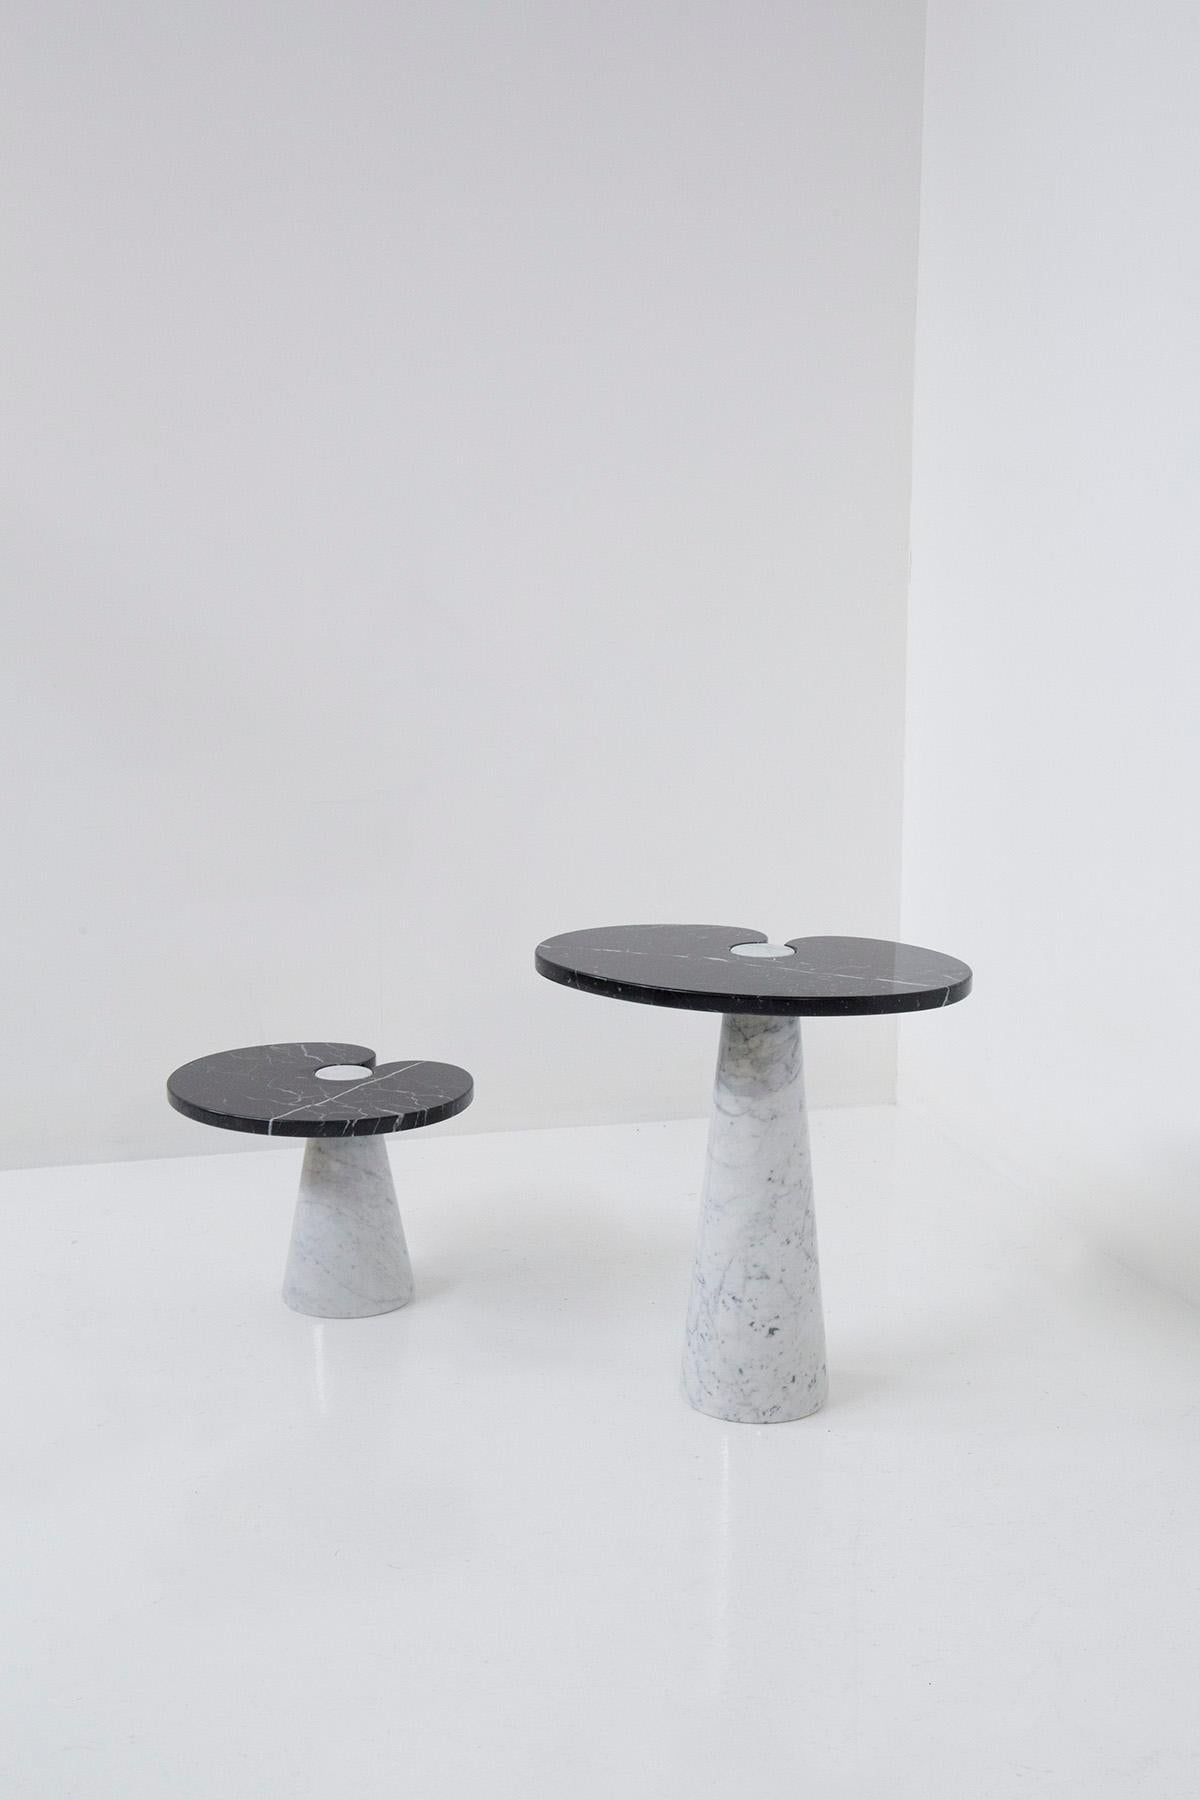 Elegant pair of bi-coloured marble coffee tables designed by Angelo Mangiarotti for the Skipper manufacture. The pair of coffee tables consists of a high and a lower coffee table. Both table tops are made of black marquina marble, while its pedestal